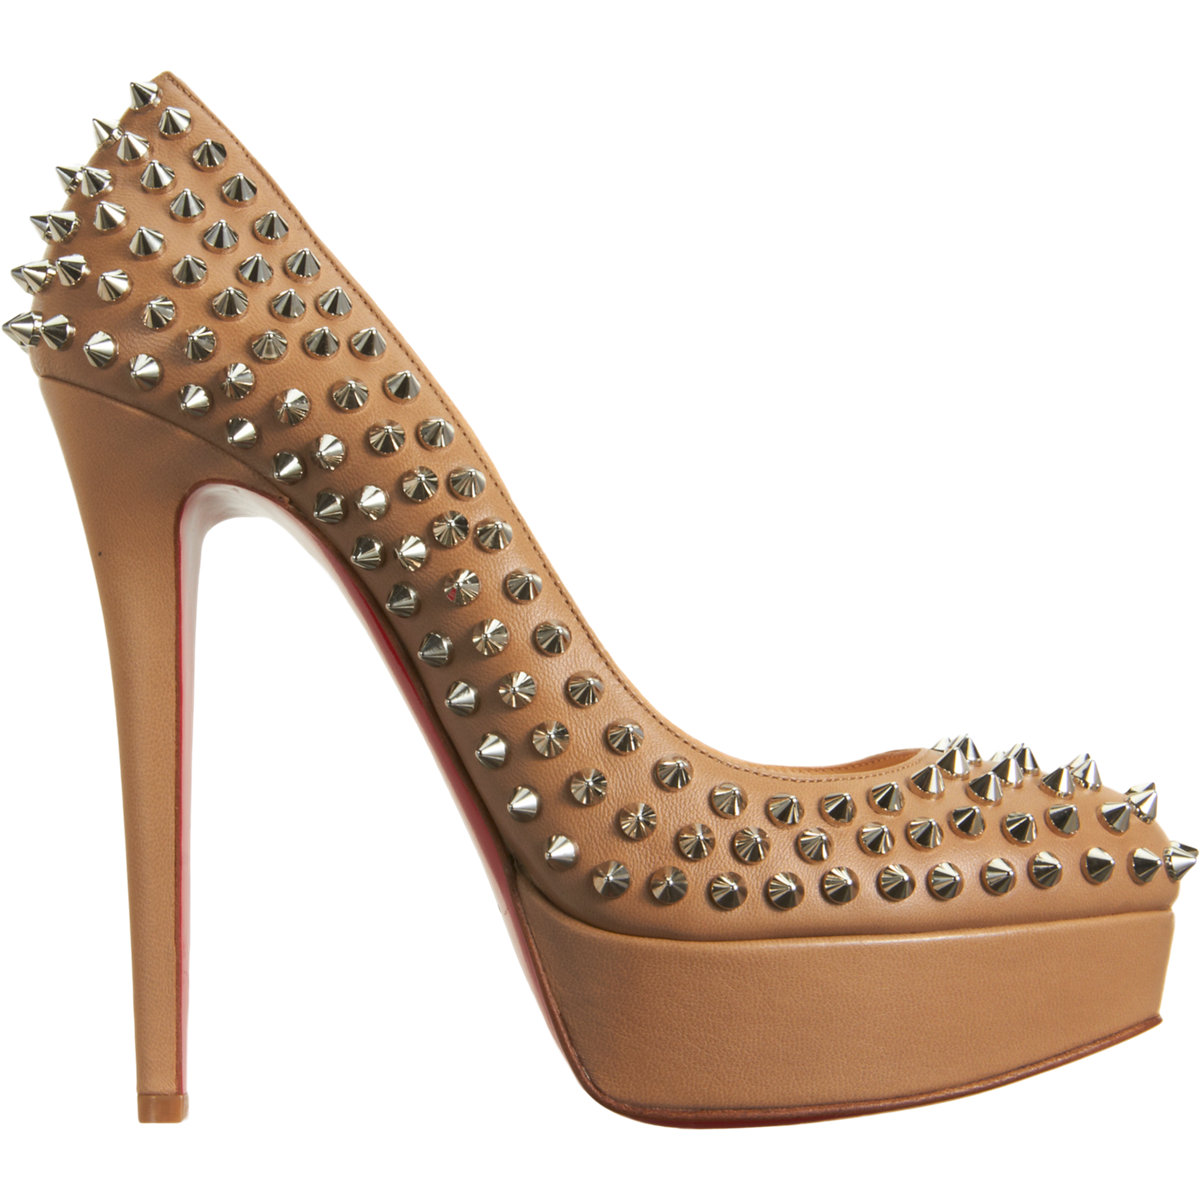 CHRISTIAN LOUBOUTIN BIANCA 140MM CORDE / SILVER SPIKES NAPPA LEATHER ...